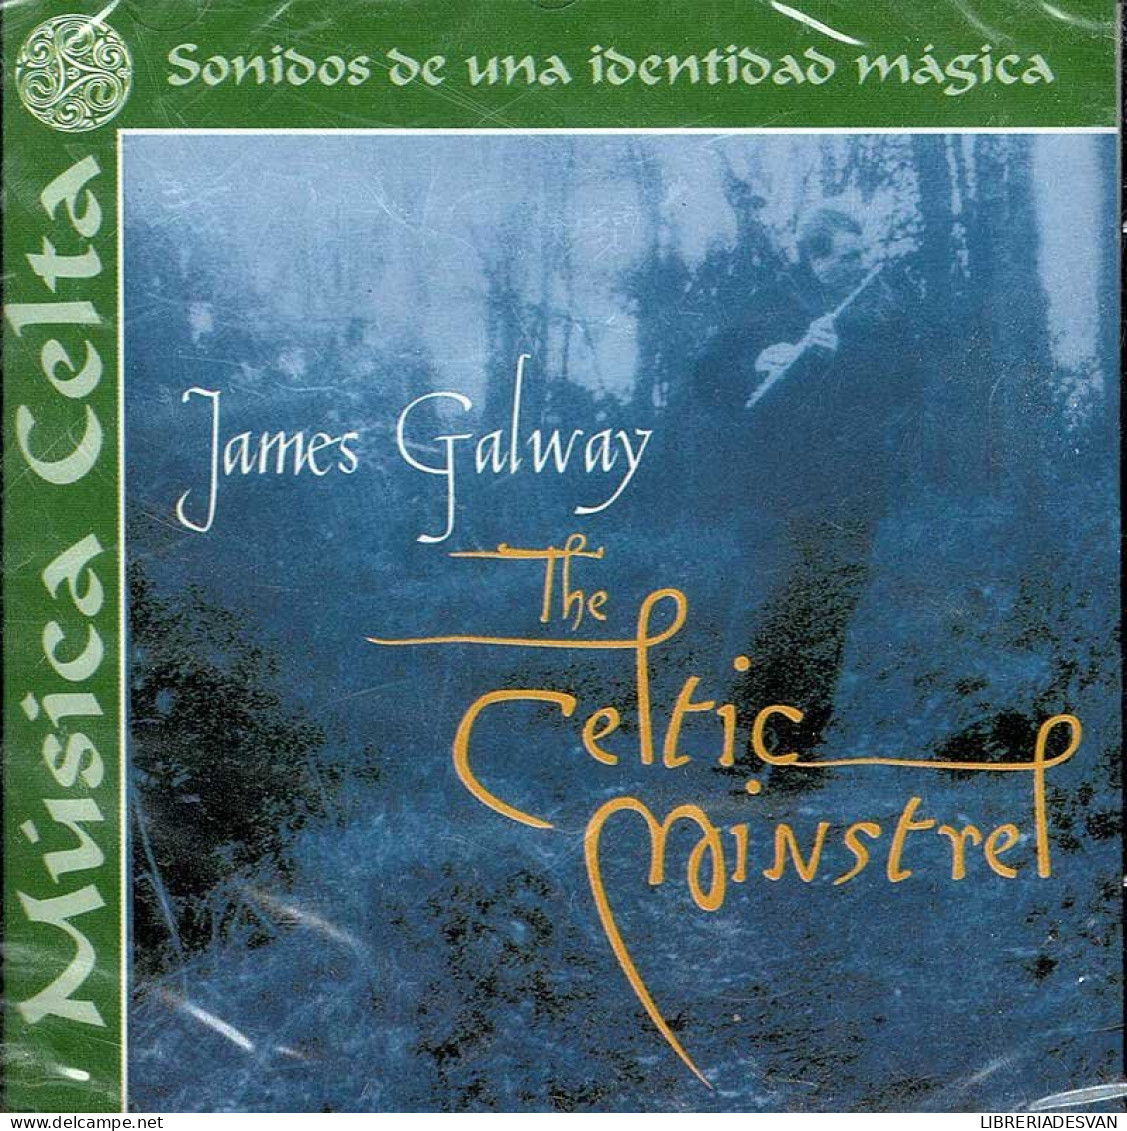 James Galway With The Chieftains & Emily Mitchell - The Celtic Minstrel. CD - Country En Folk